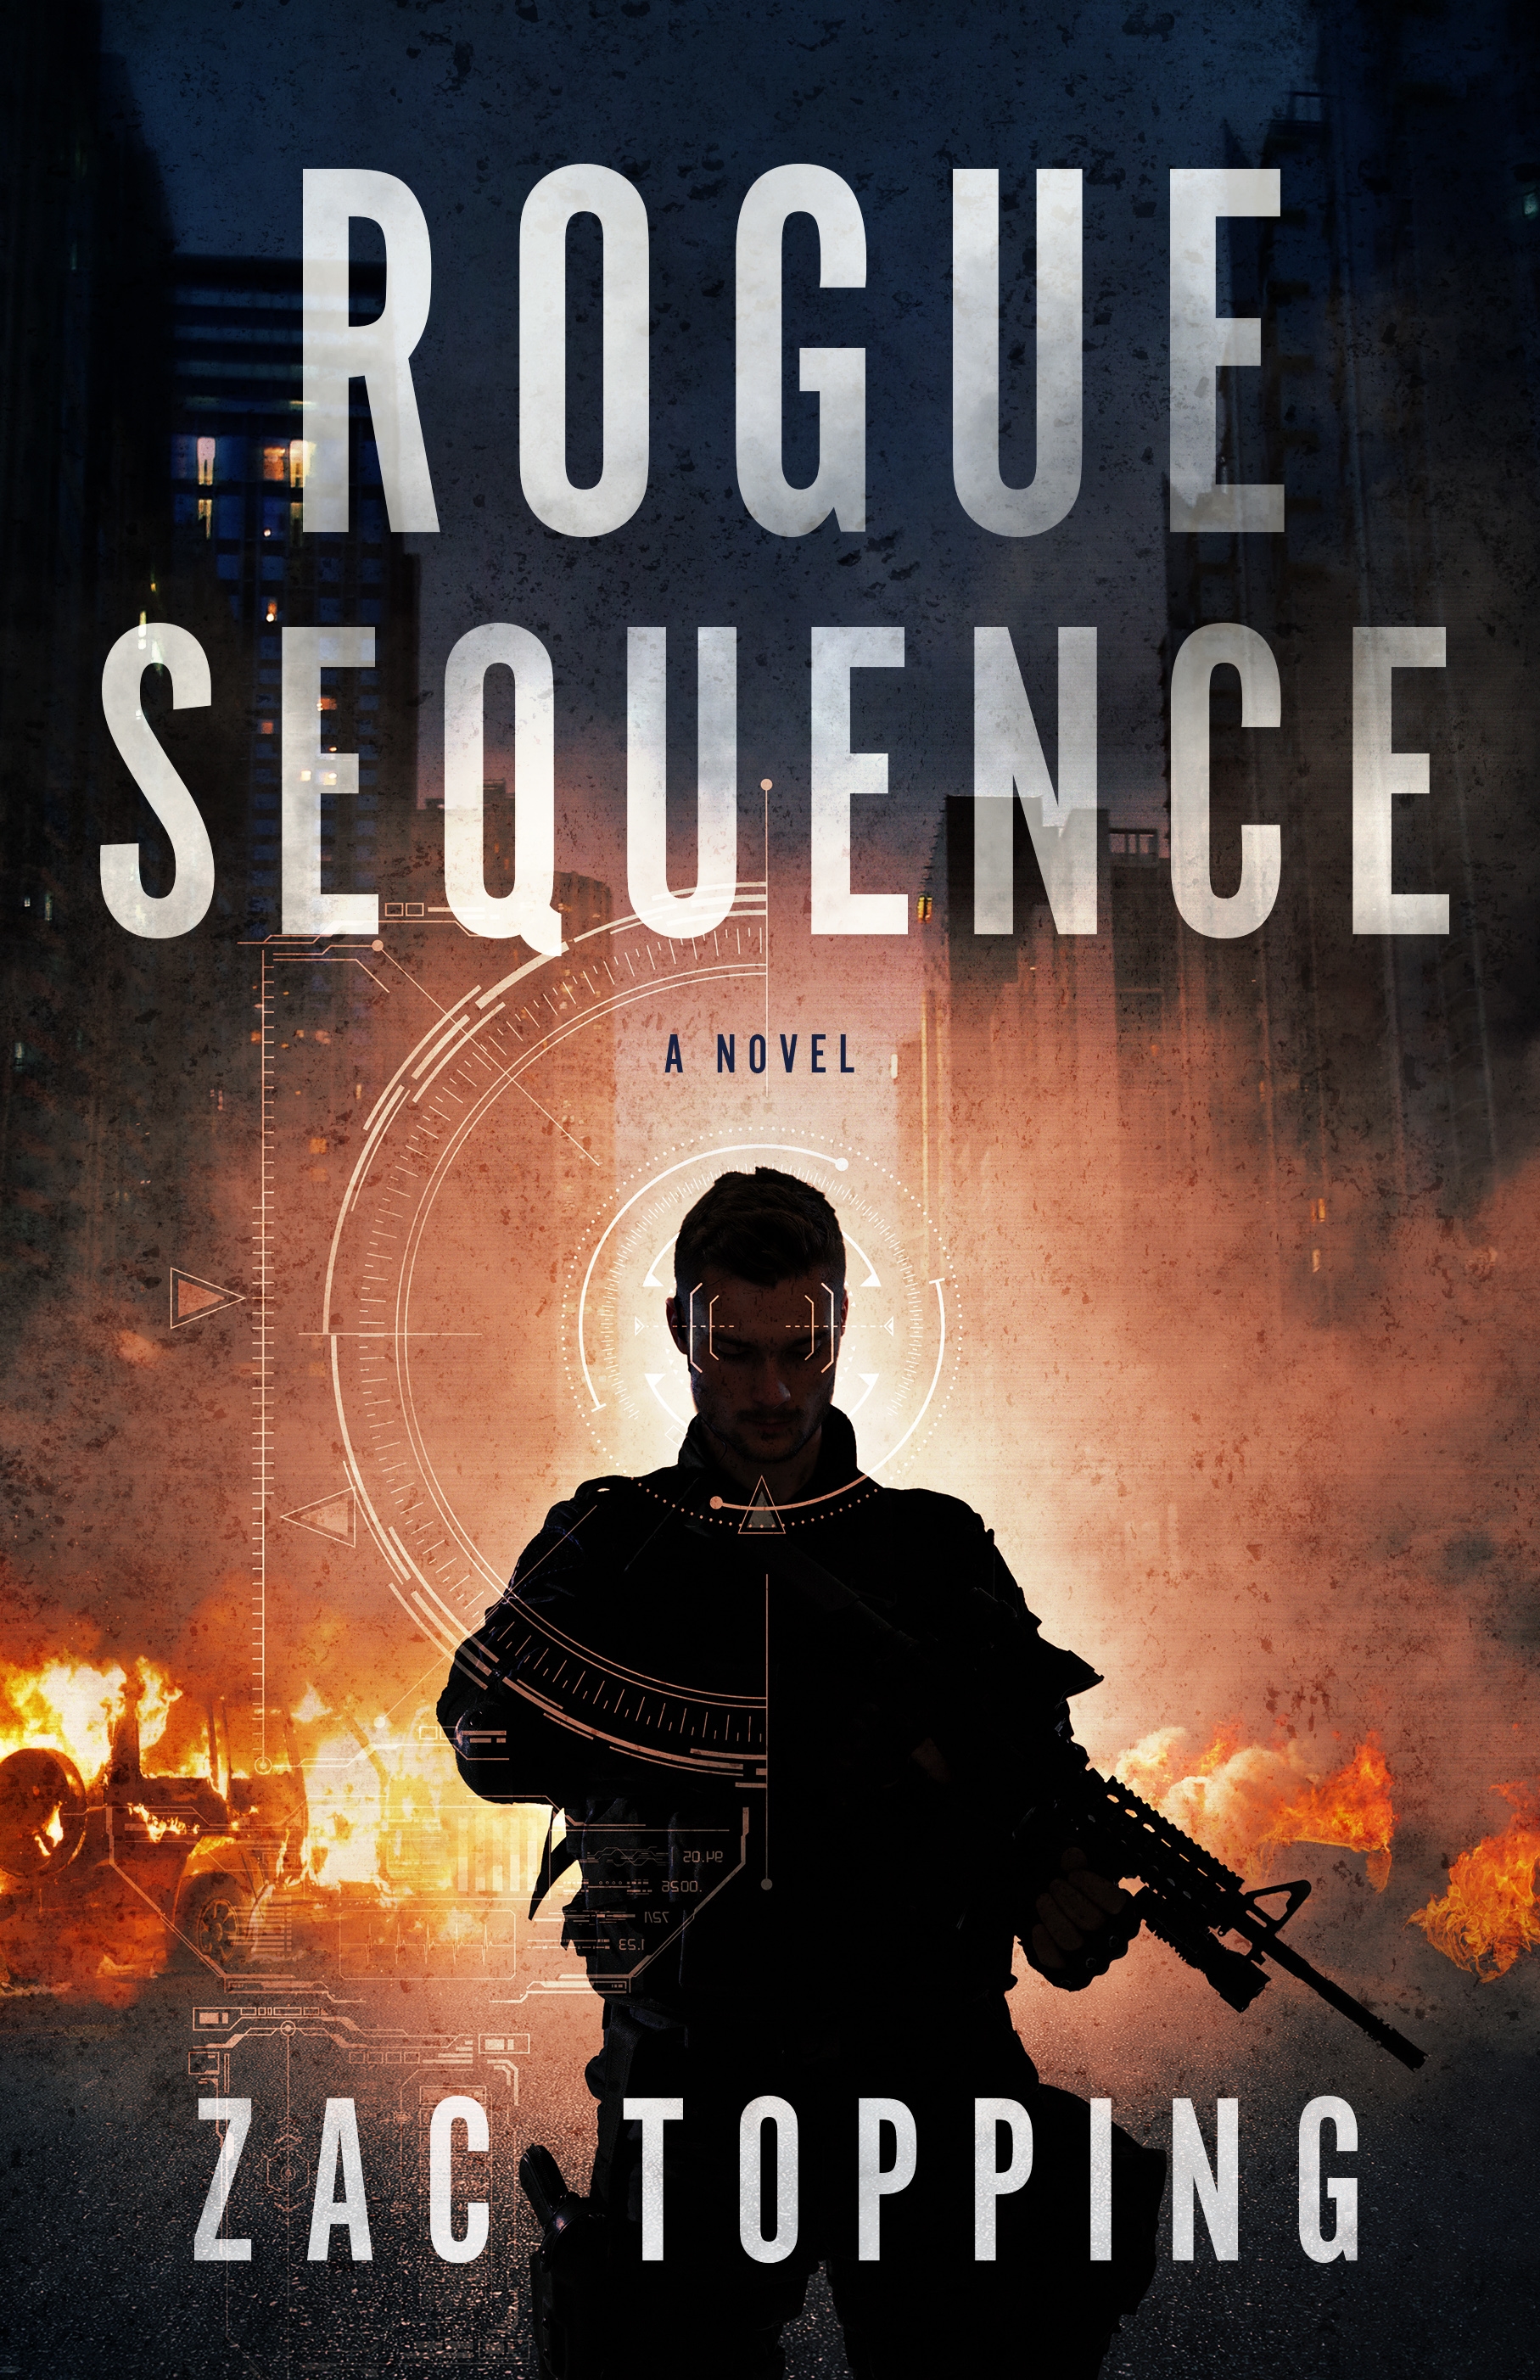 Rogue Sequence : A Novel by Zac Topping